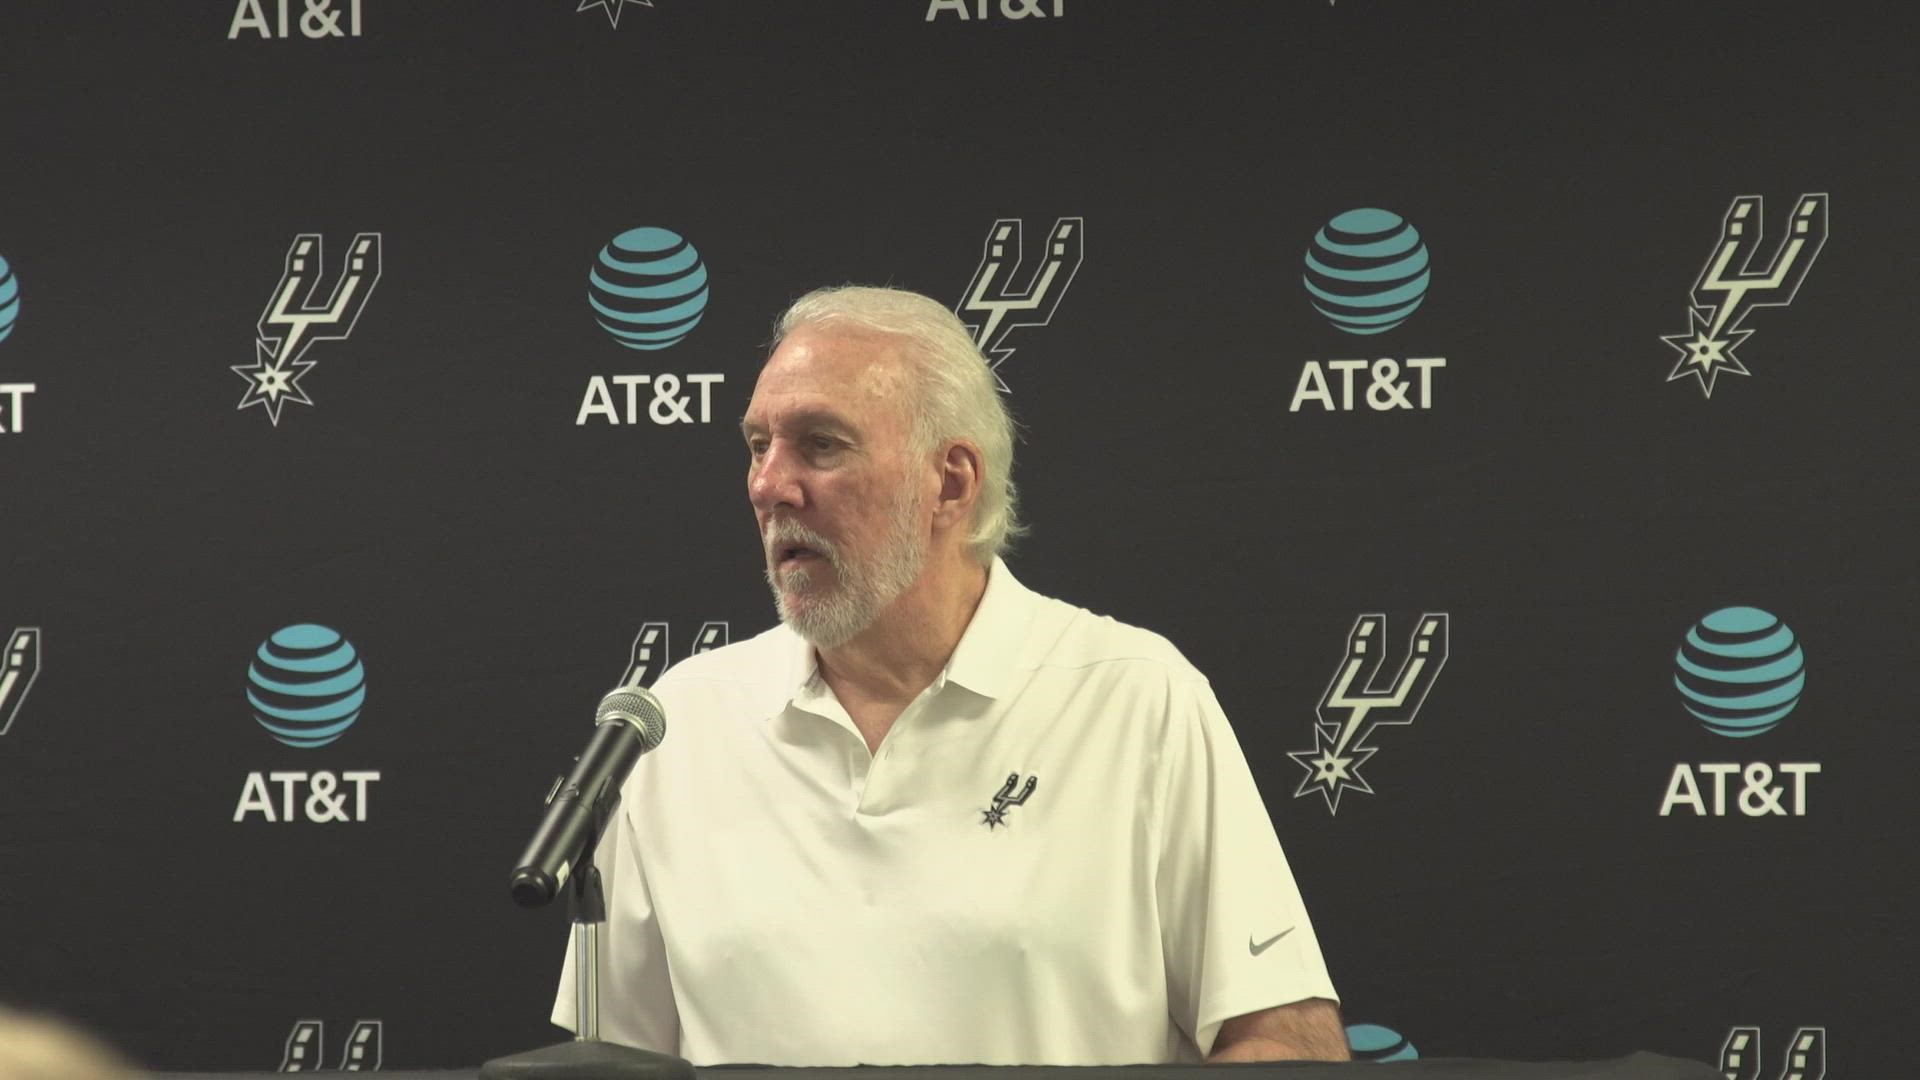 Popovich said it's been fun working with this group of players ahead of their biggest test of the season so far.